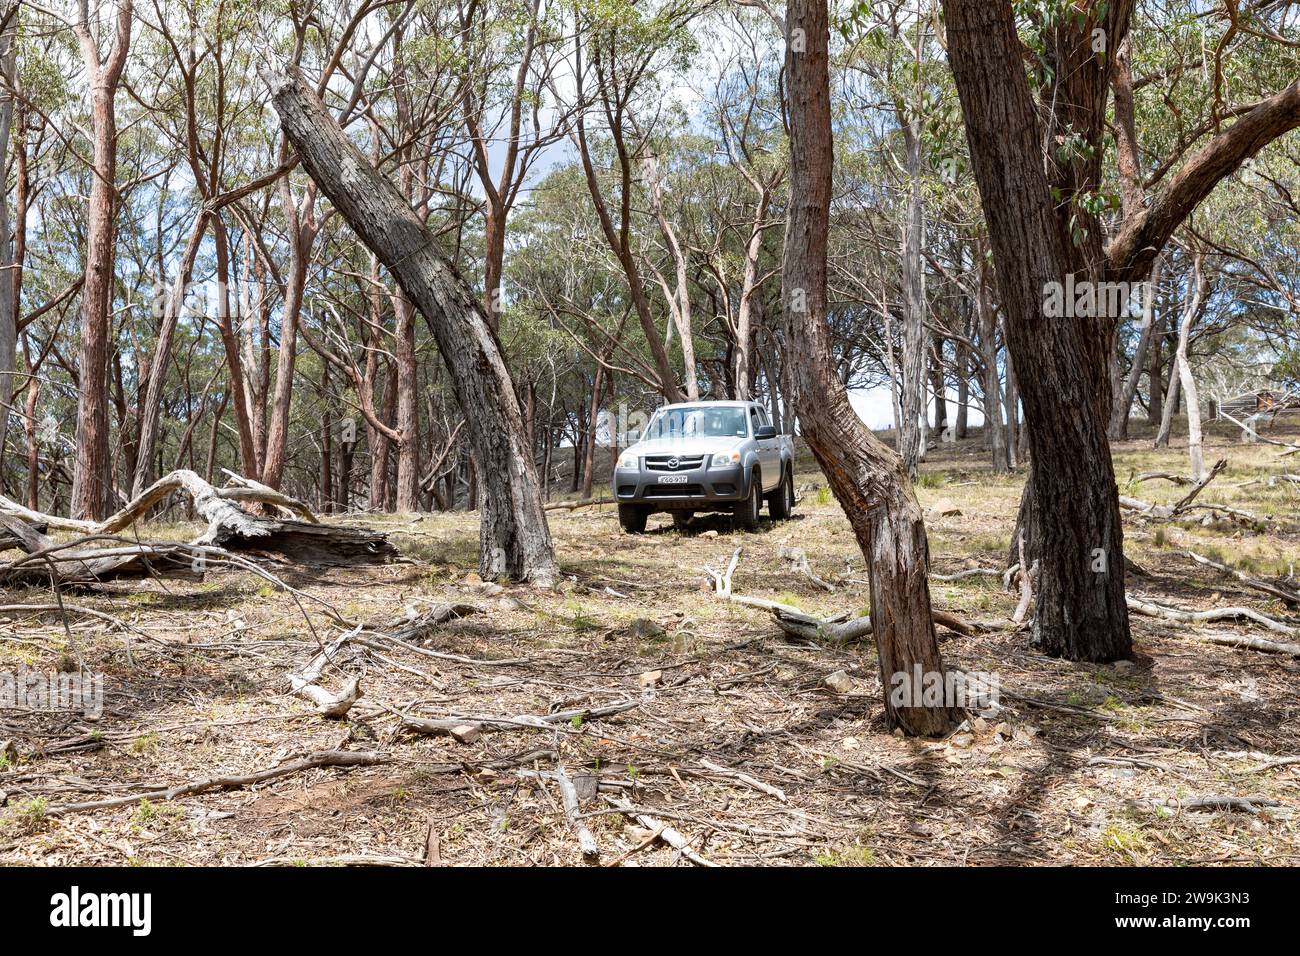 Australian landscape driving off road in the bush in Mazda BT50 ute utility vehicle,Central West NSW,Australia Stock Photo